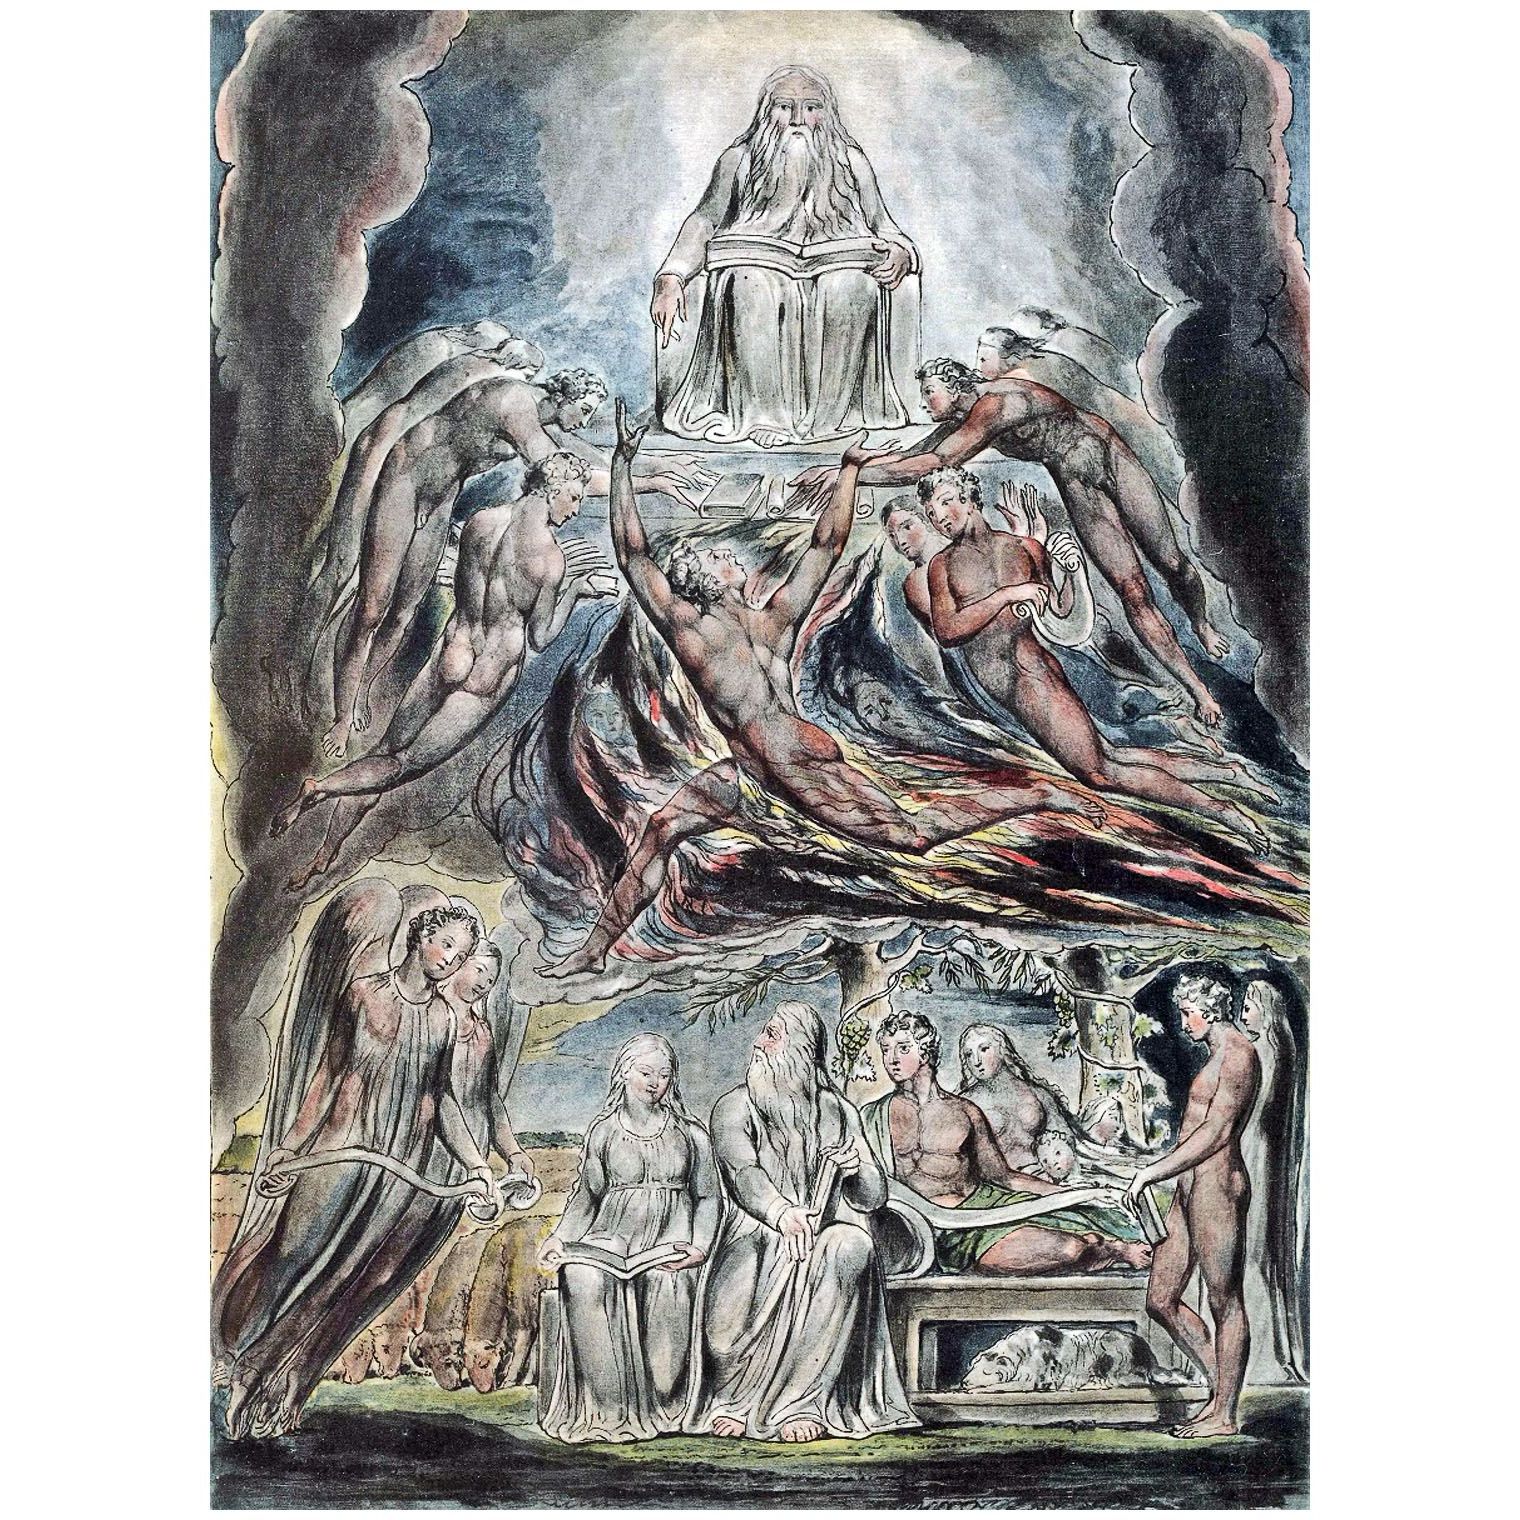 William Blake. Satan before the Throne of God, The Book of Job. 1821. New York Public Library